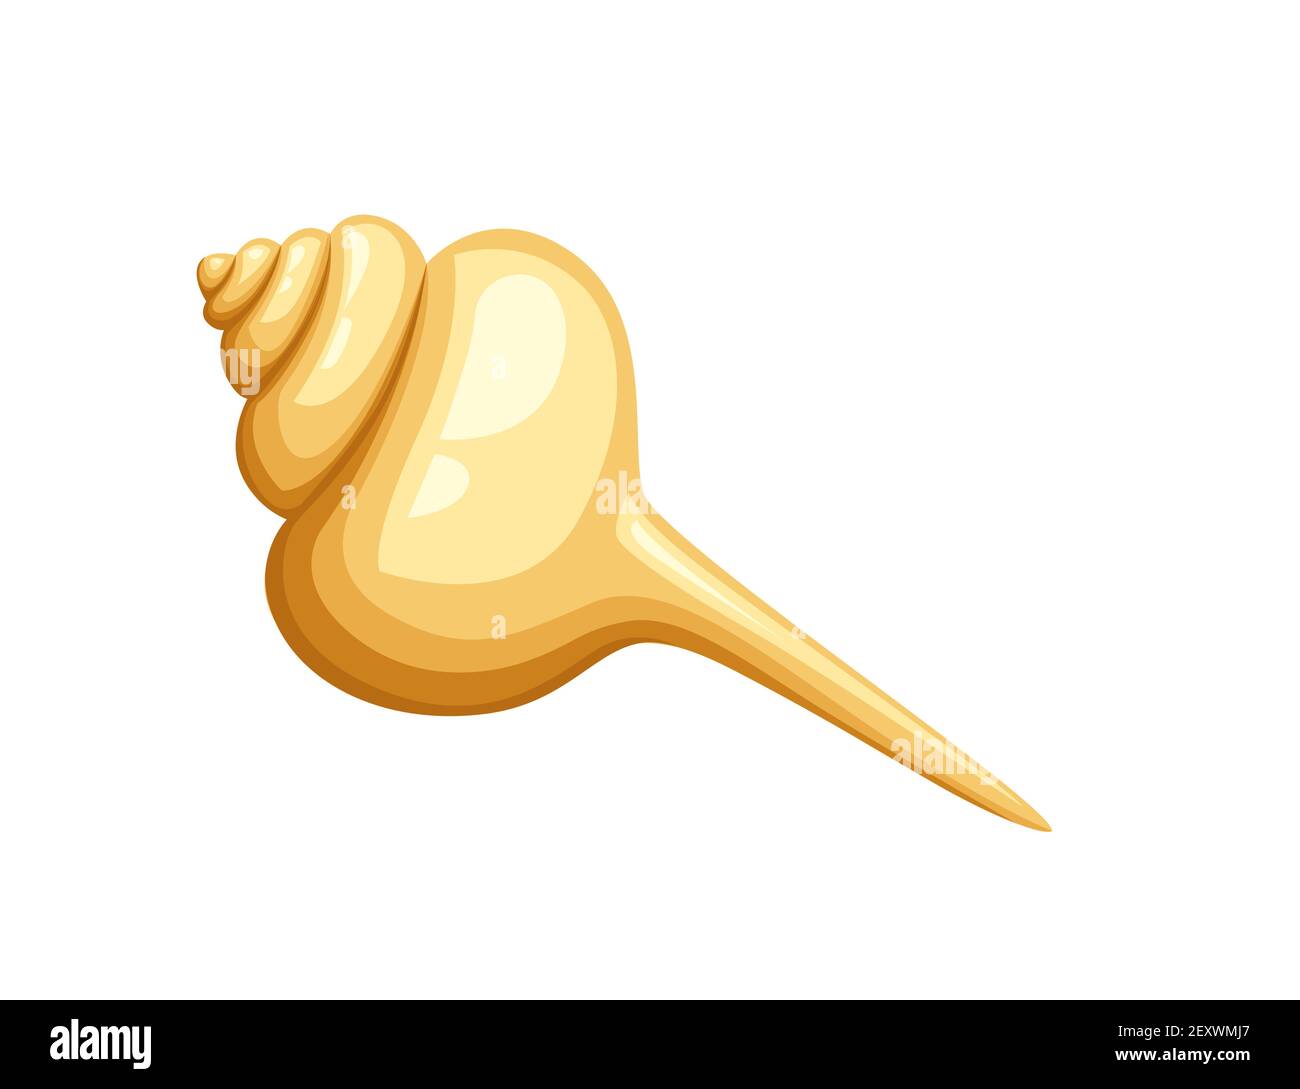 Yellow seashell simple nautical souvenir vector illustration isolated on white background Stock Vector